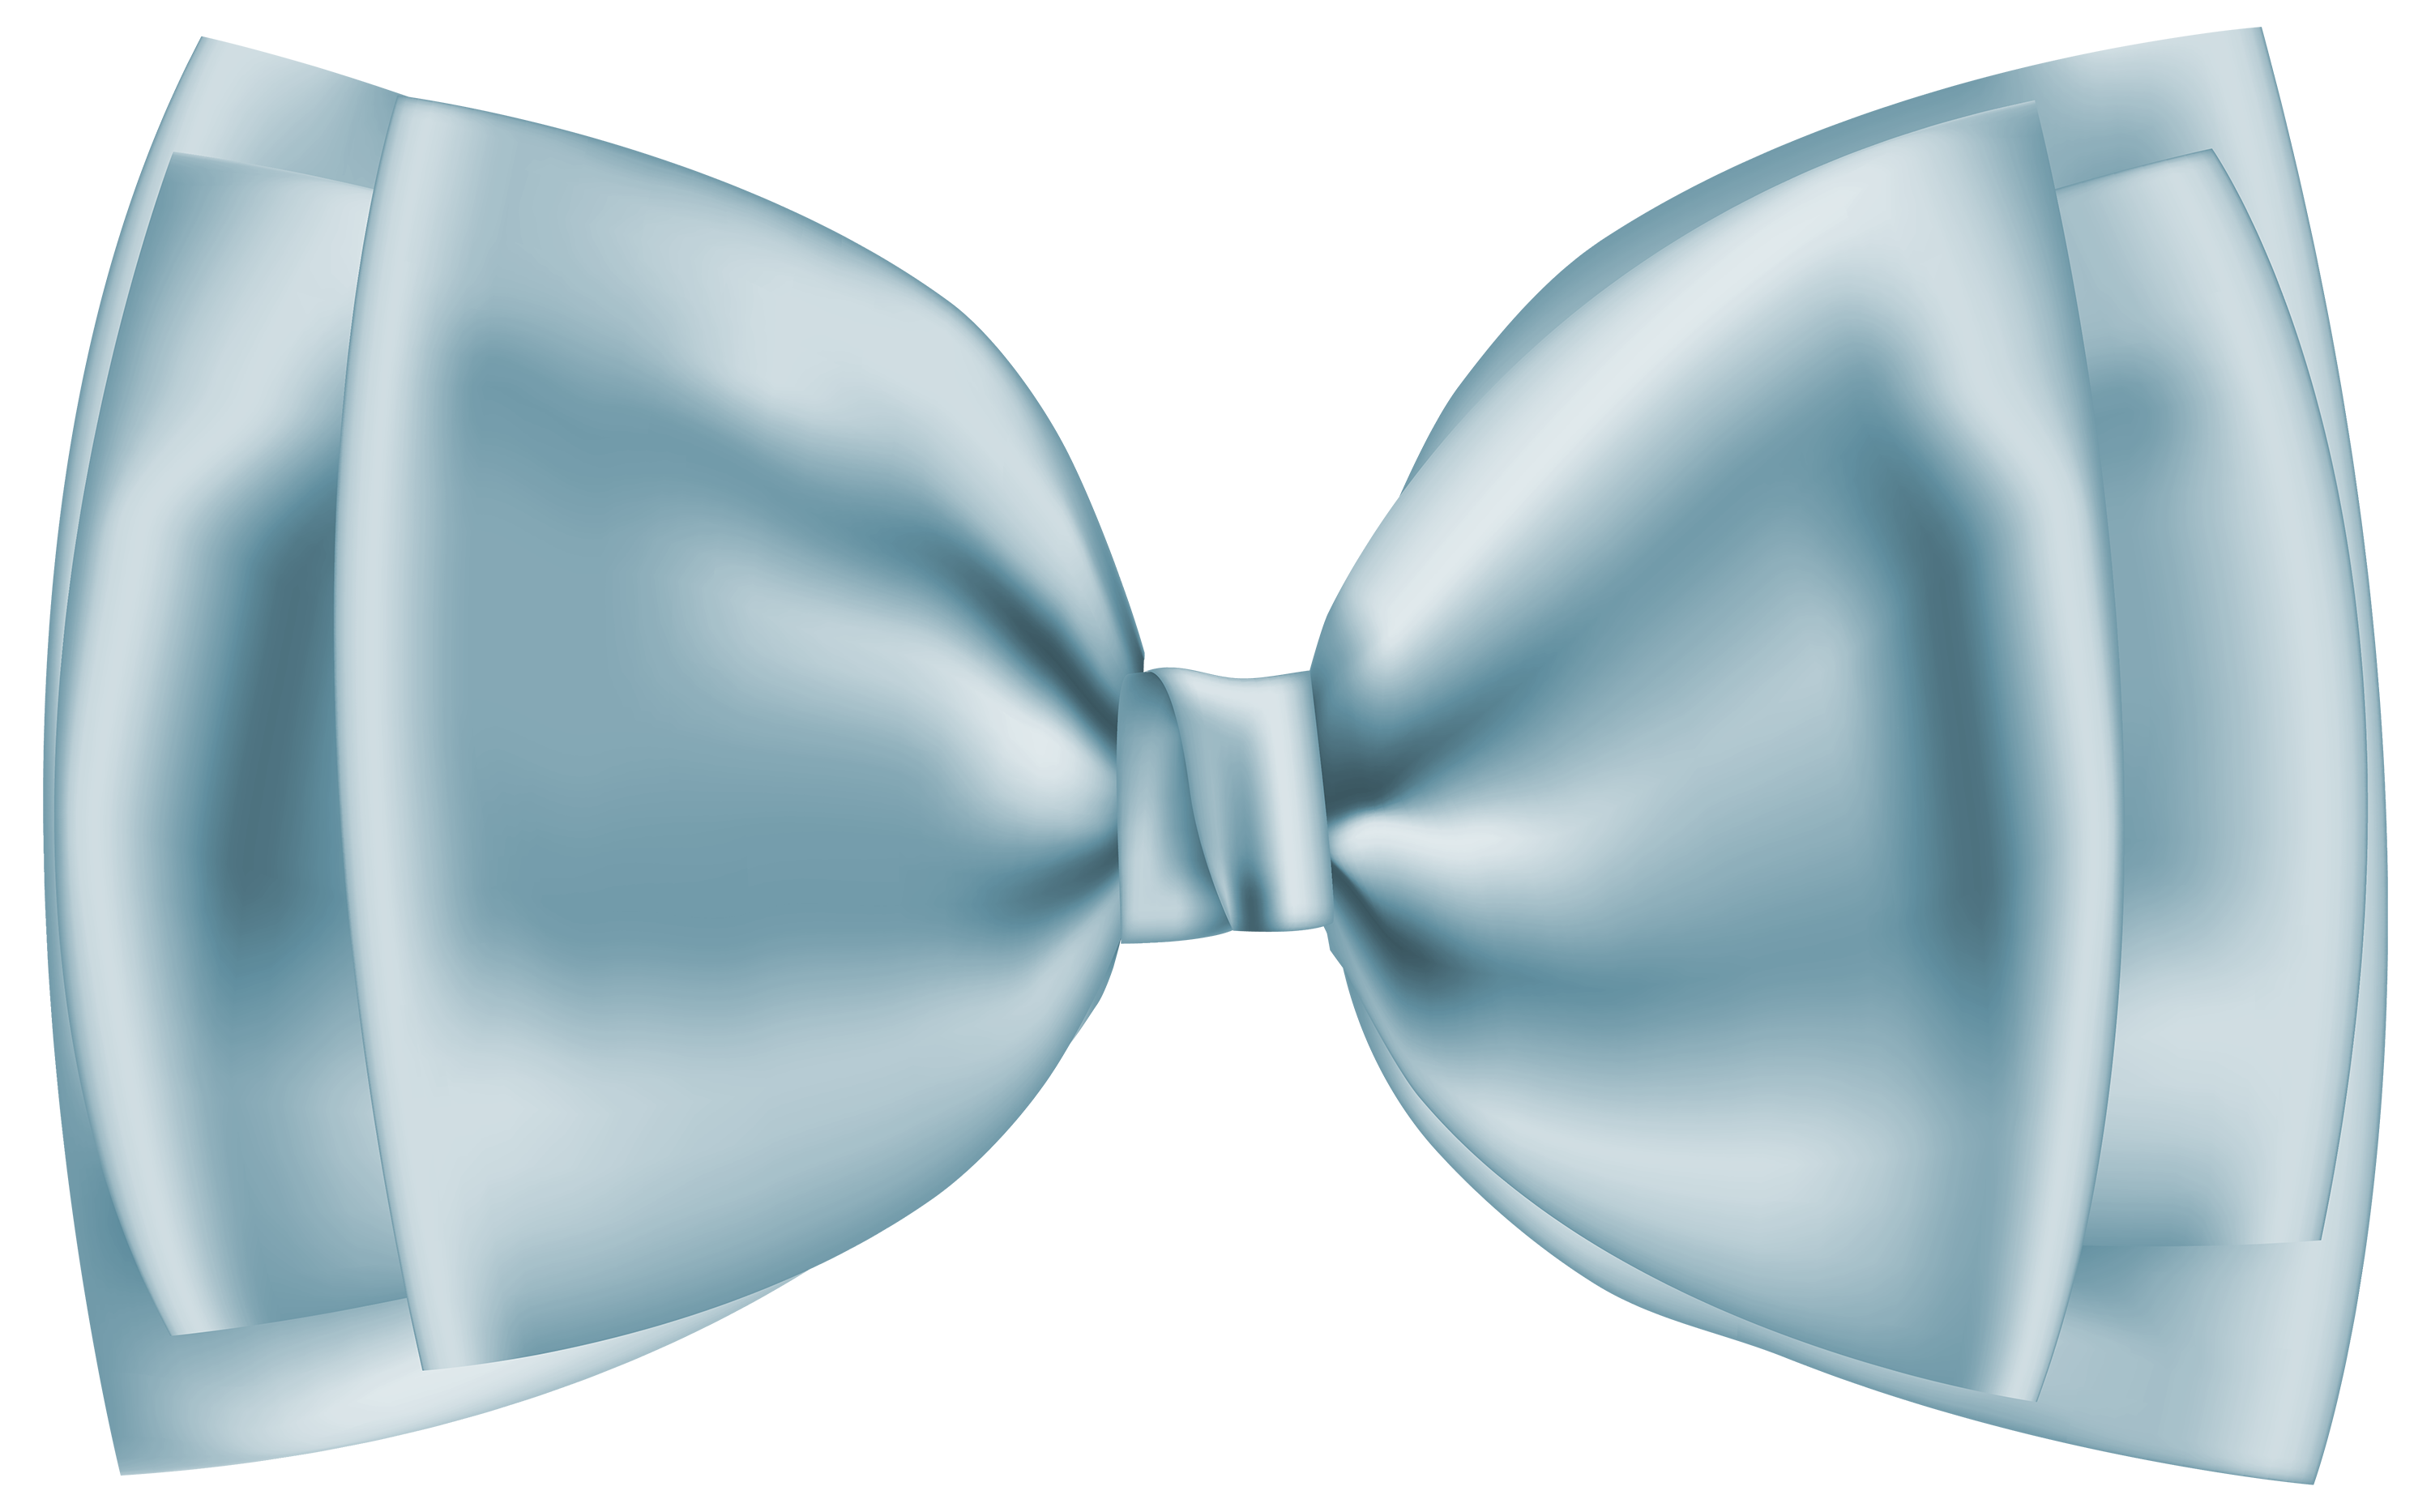 clipart bow watercolor